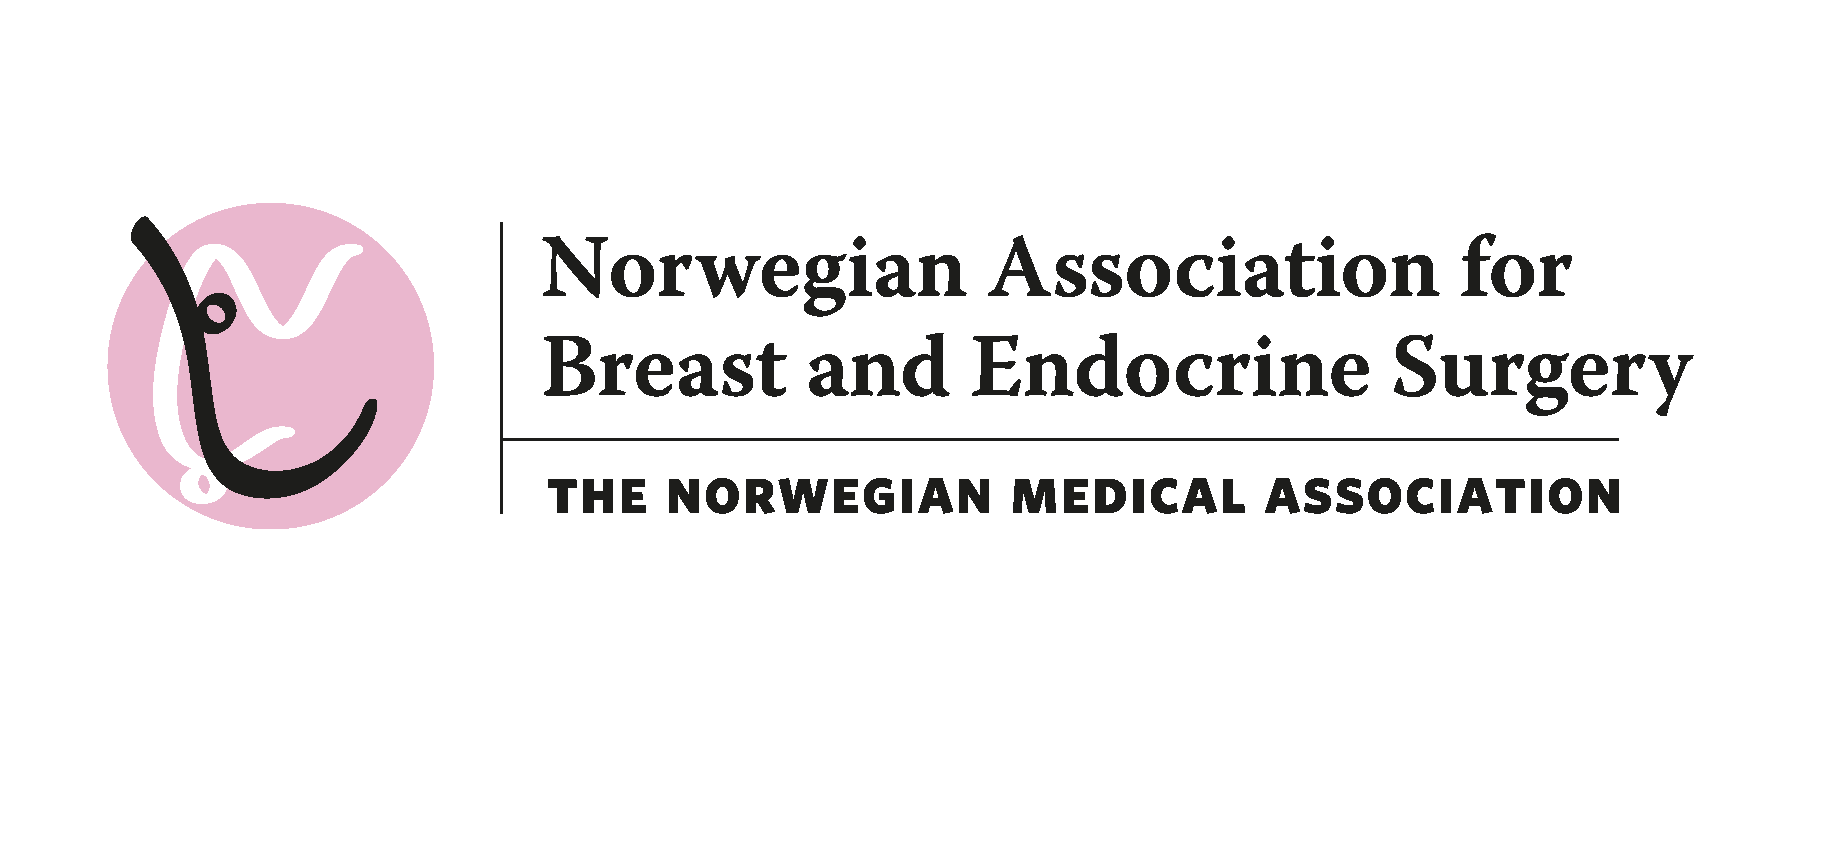 Norwegian Association for Breast and Endocrine Surgery